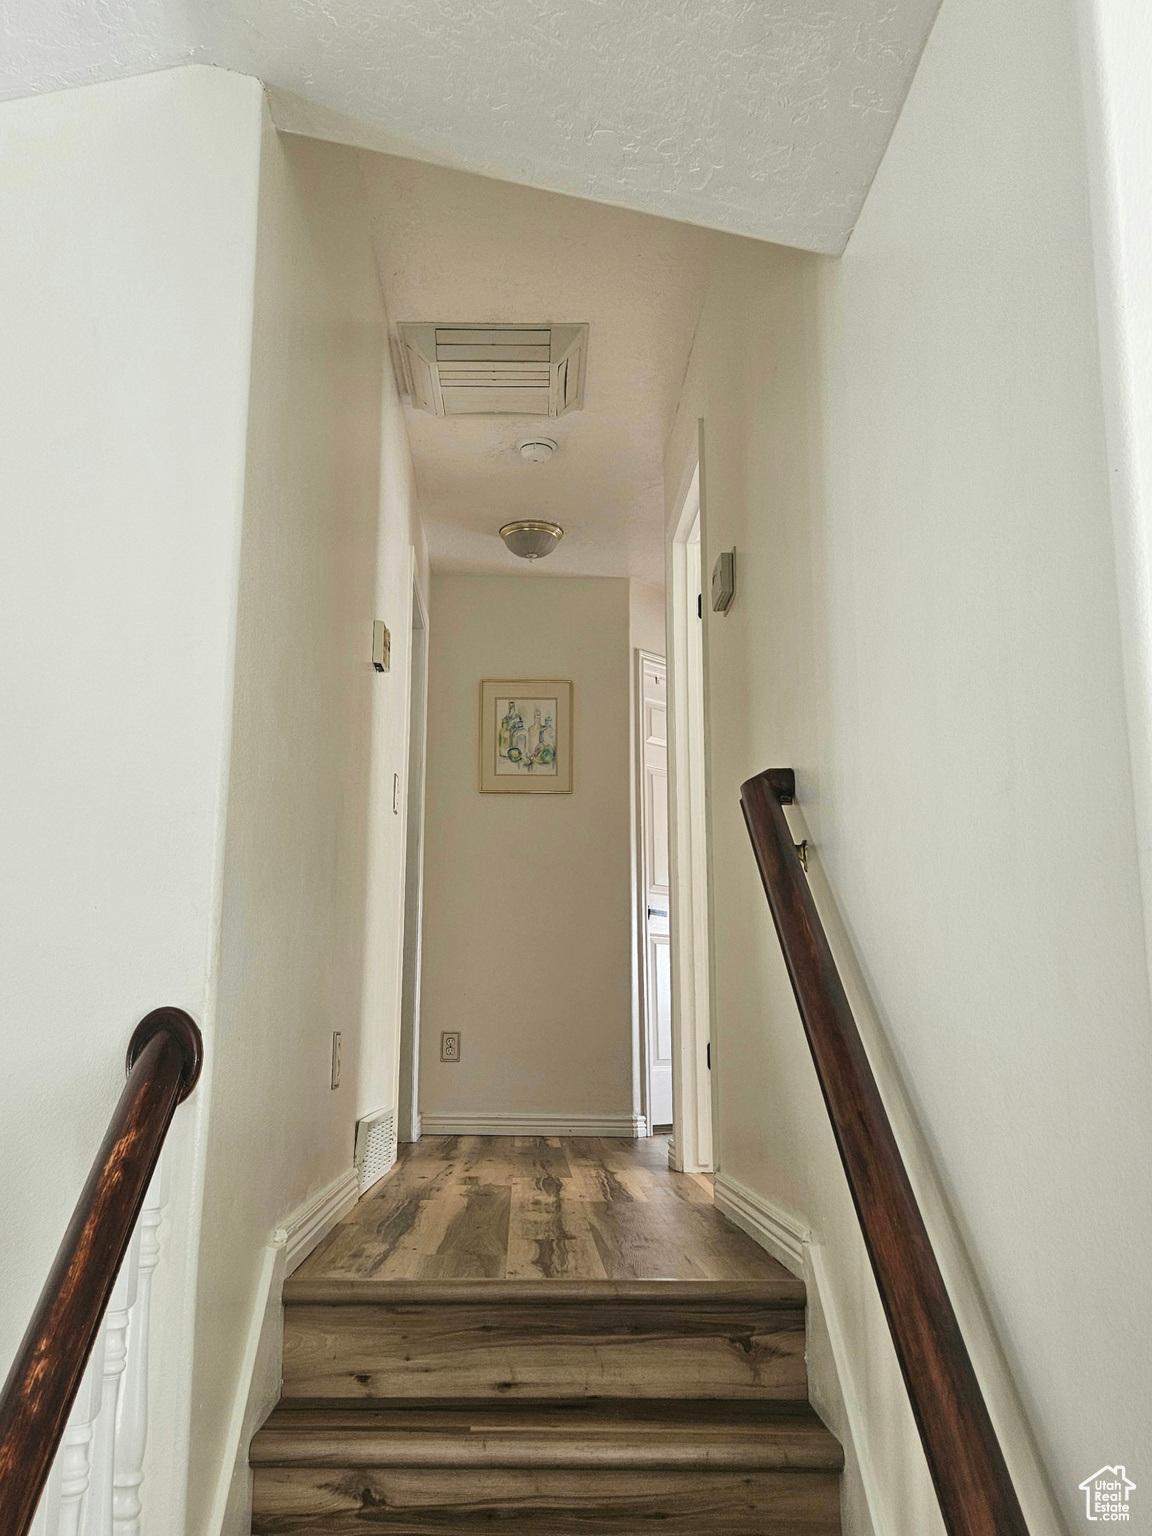 Stairs up to master, 2 bedrooms, hallway bathroom and linen closet